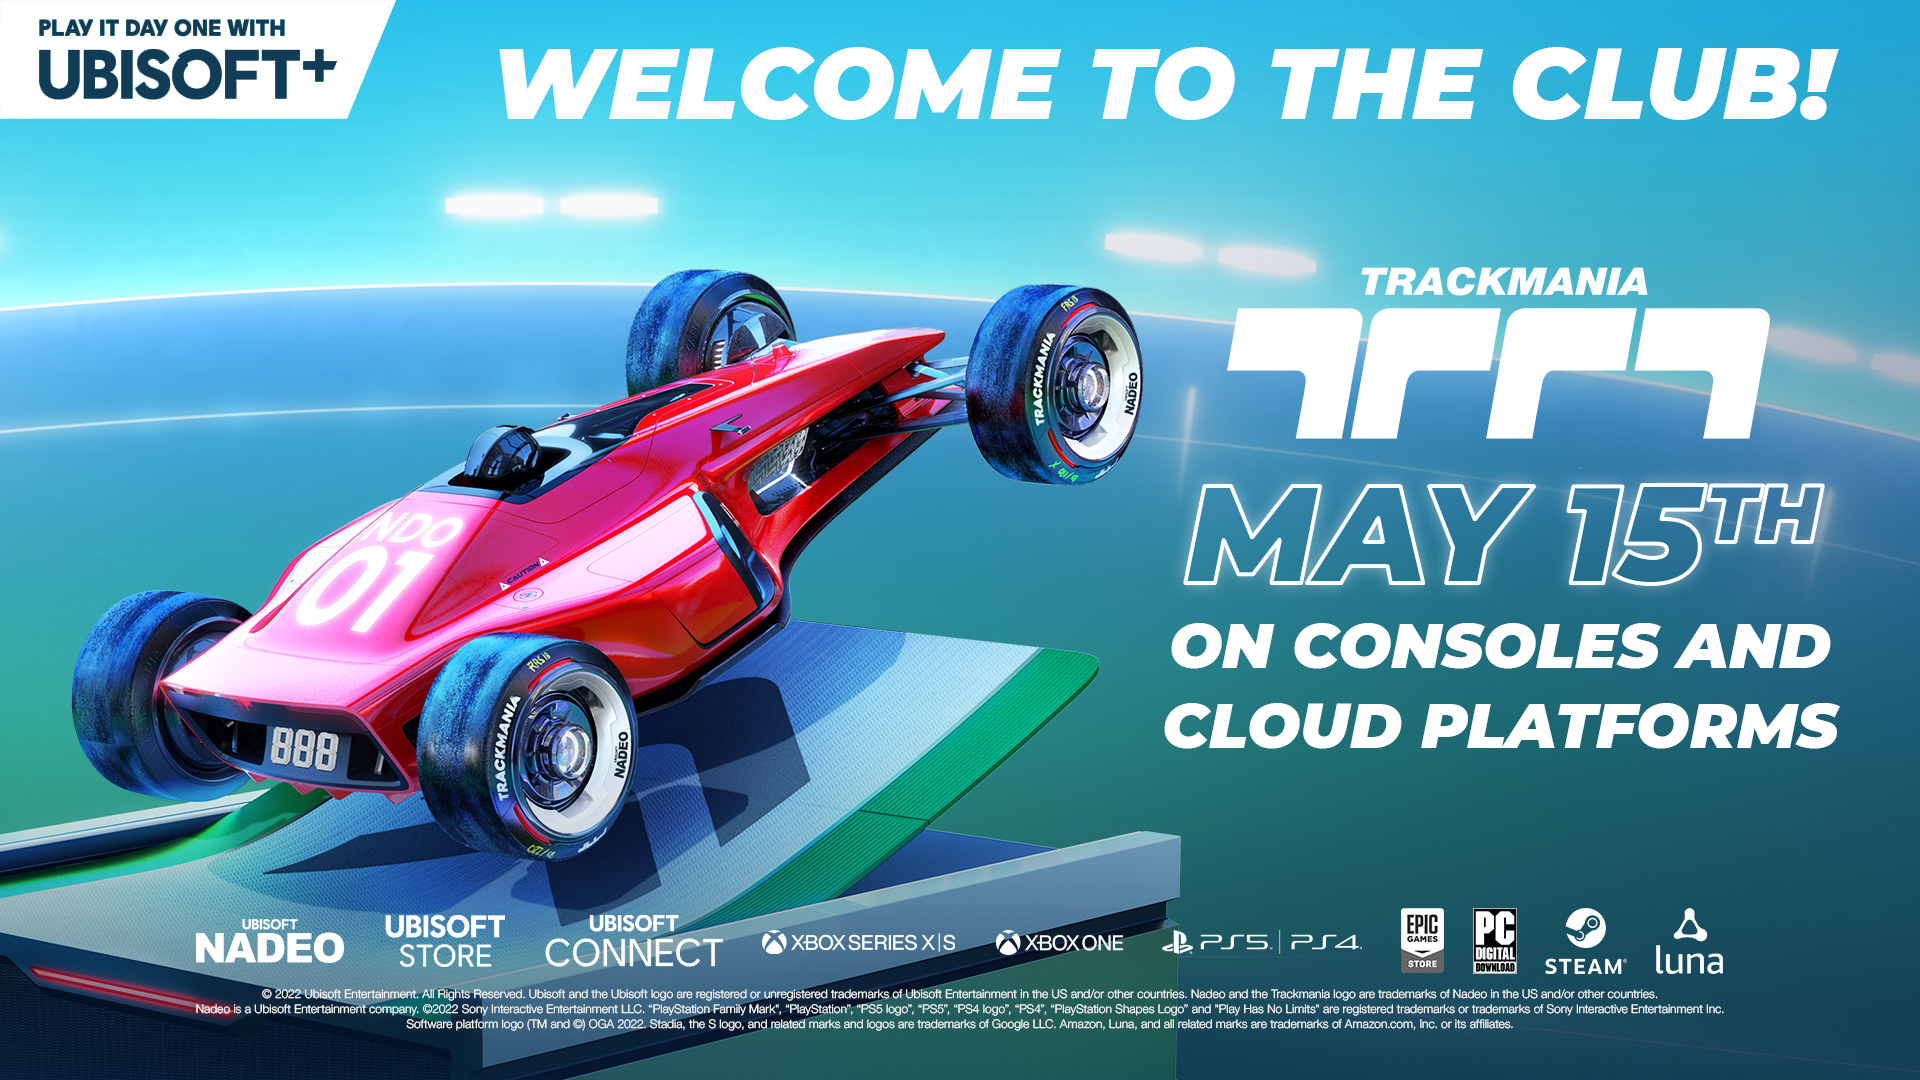 TRACKMANIA® IS ON TRACK FOR ITS CONSOLE AND CLOUD PLATFORM RELEASE ON MAY 15TH 